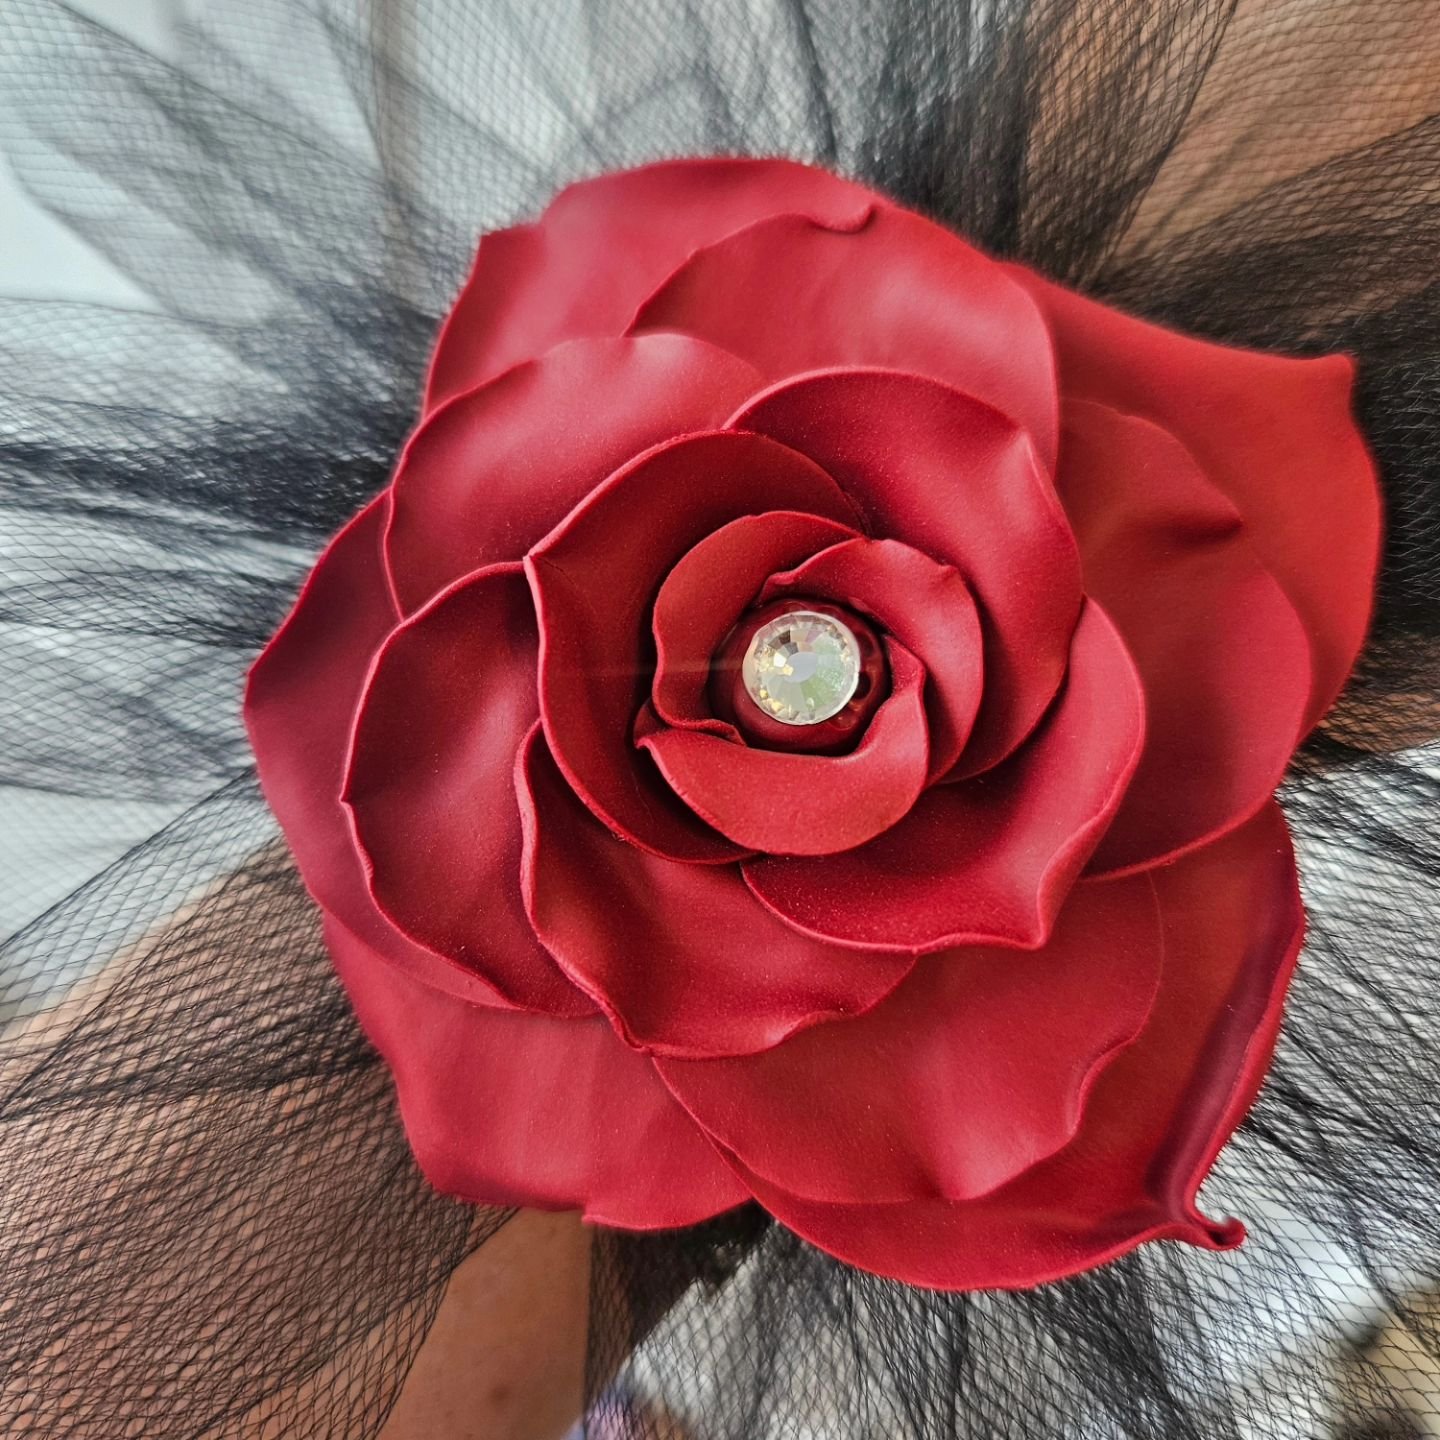 Tonight my oldest daughter is attending her first prom and even let me make her wrist corsage - from clay of course! 🥰

#polymerclayartist #clayroses #promcorsage #wristcorsage #handmade #promkeepsake